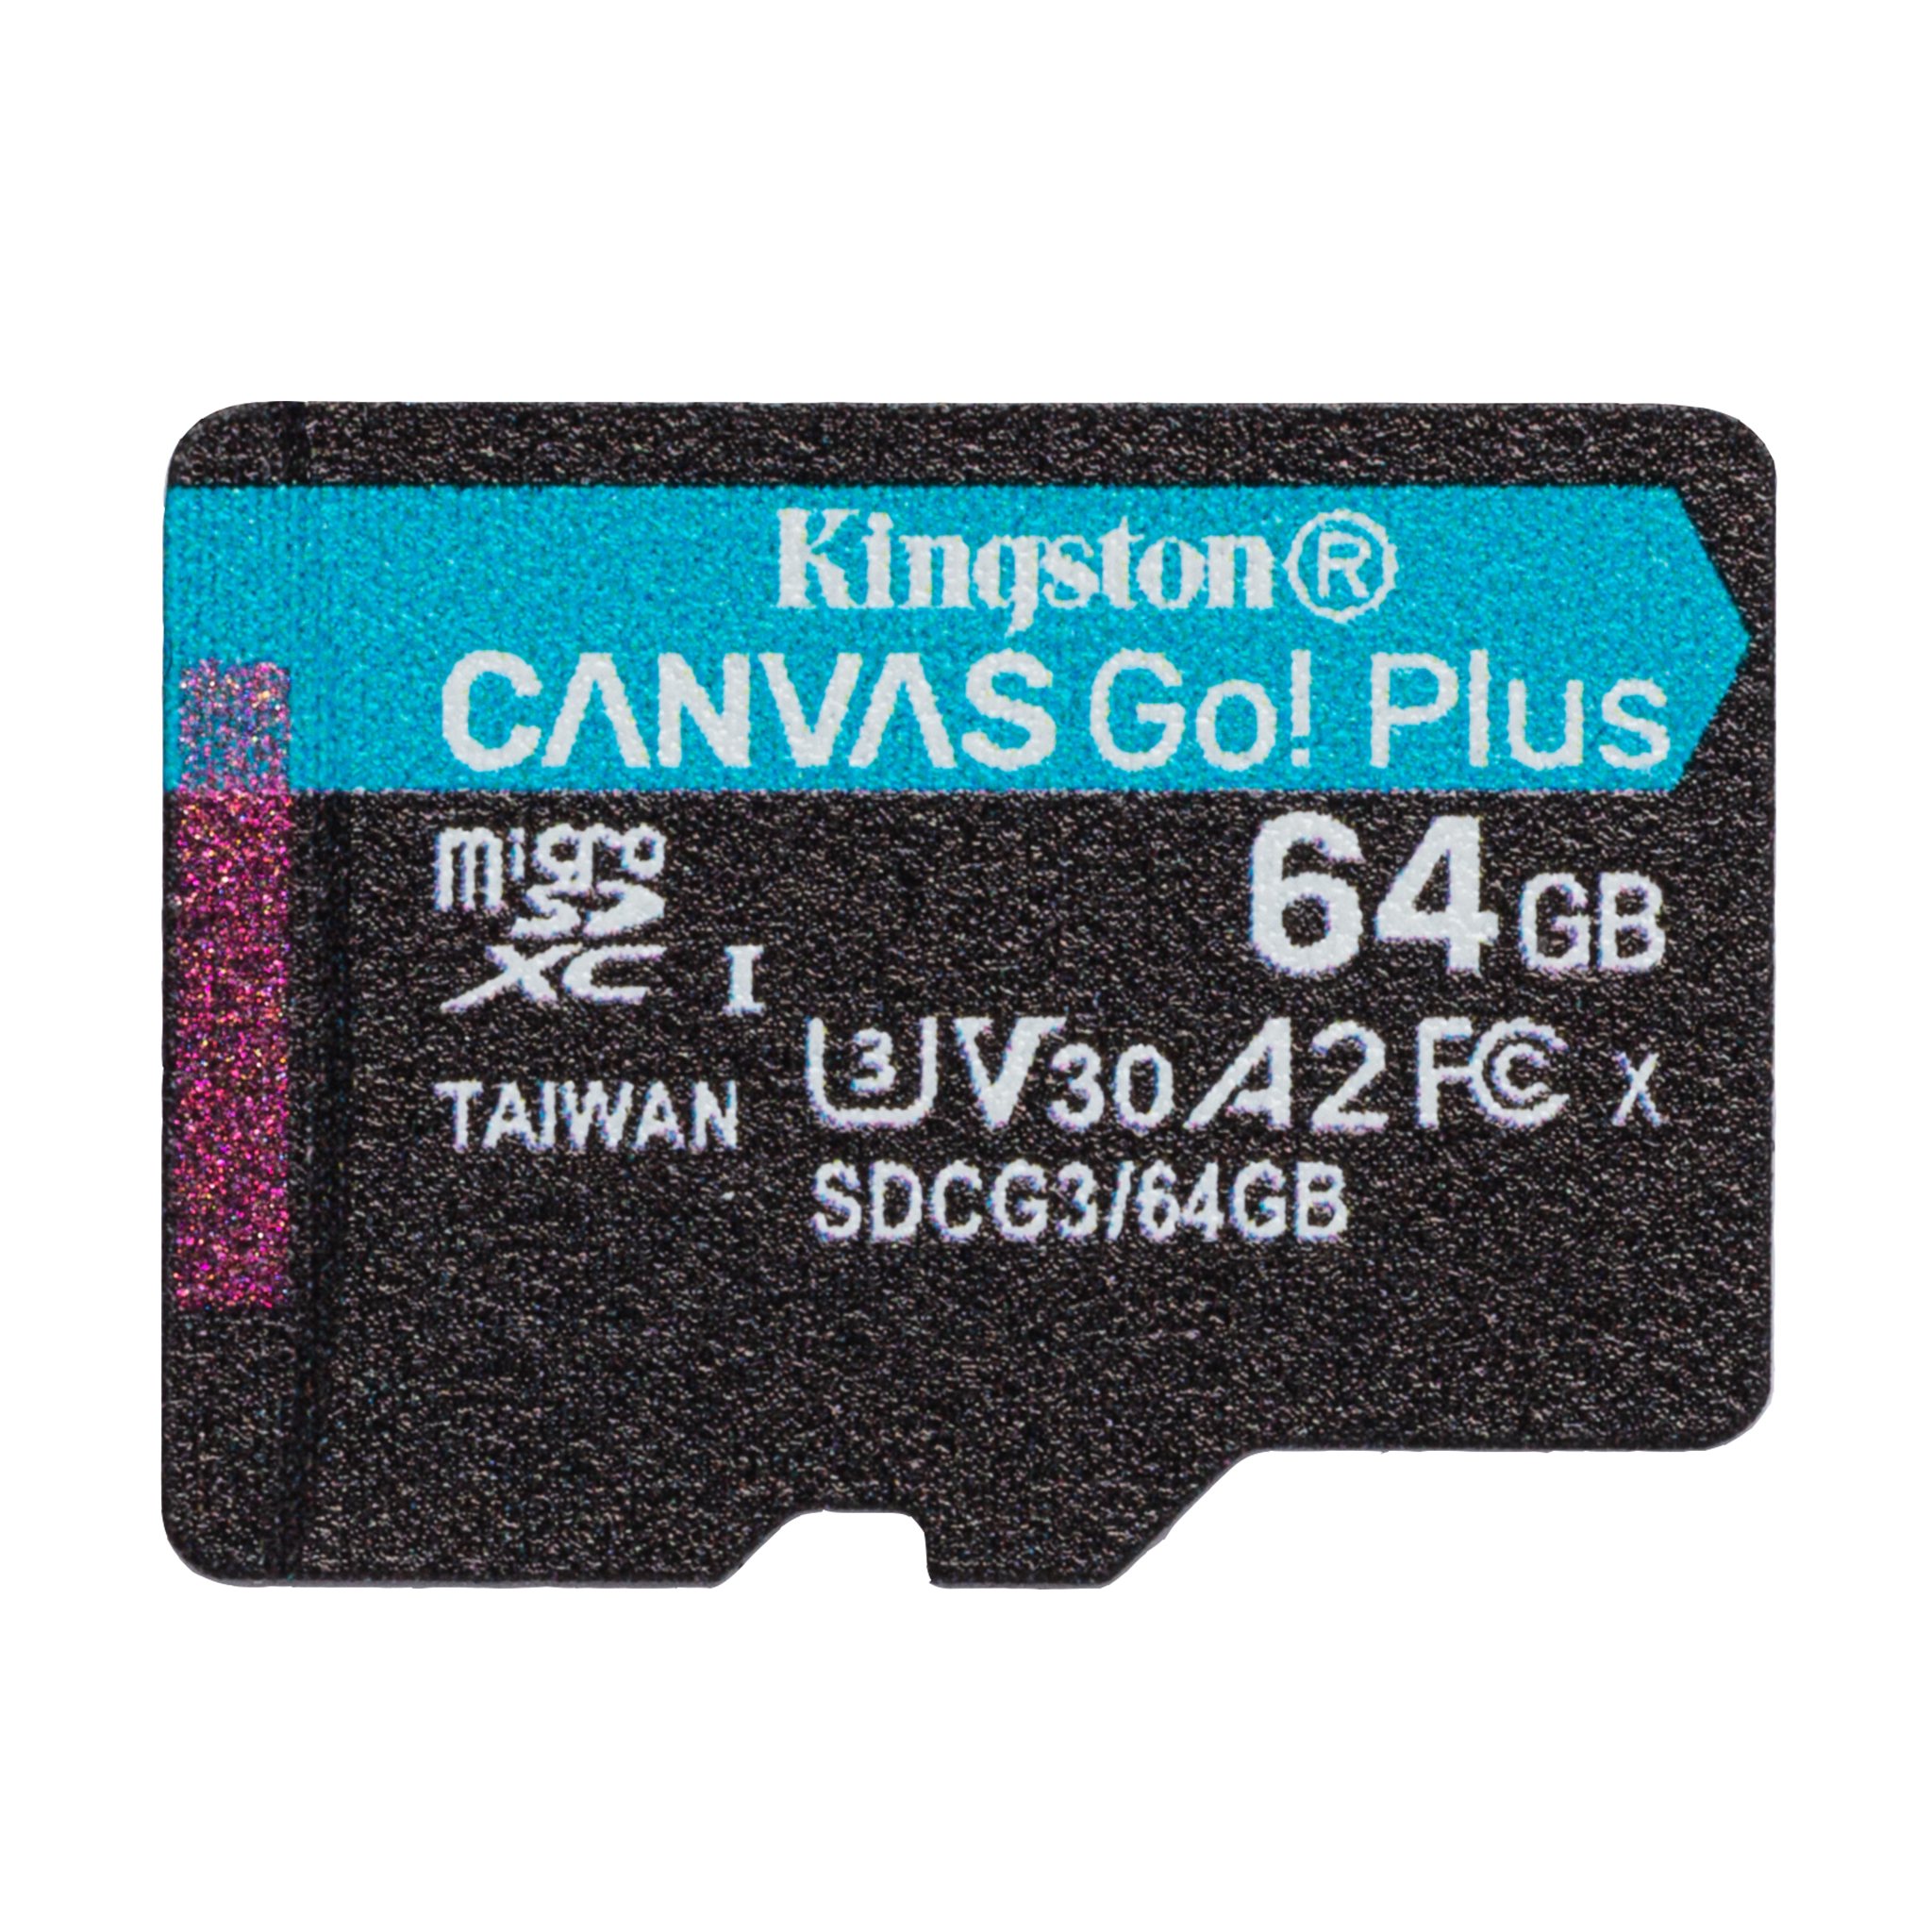 Kingston 512GB LG G Pad 8.3 Play Edition MicroSDXC Canvas Select Plus Card Verified by SanFlash. 100MBs Works with Kingston